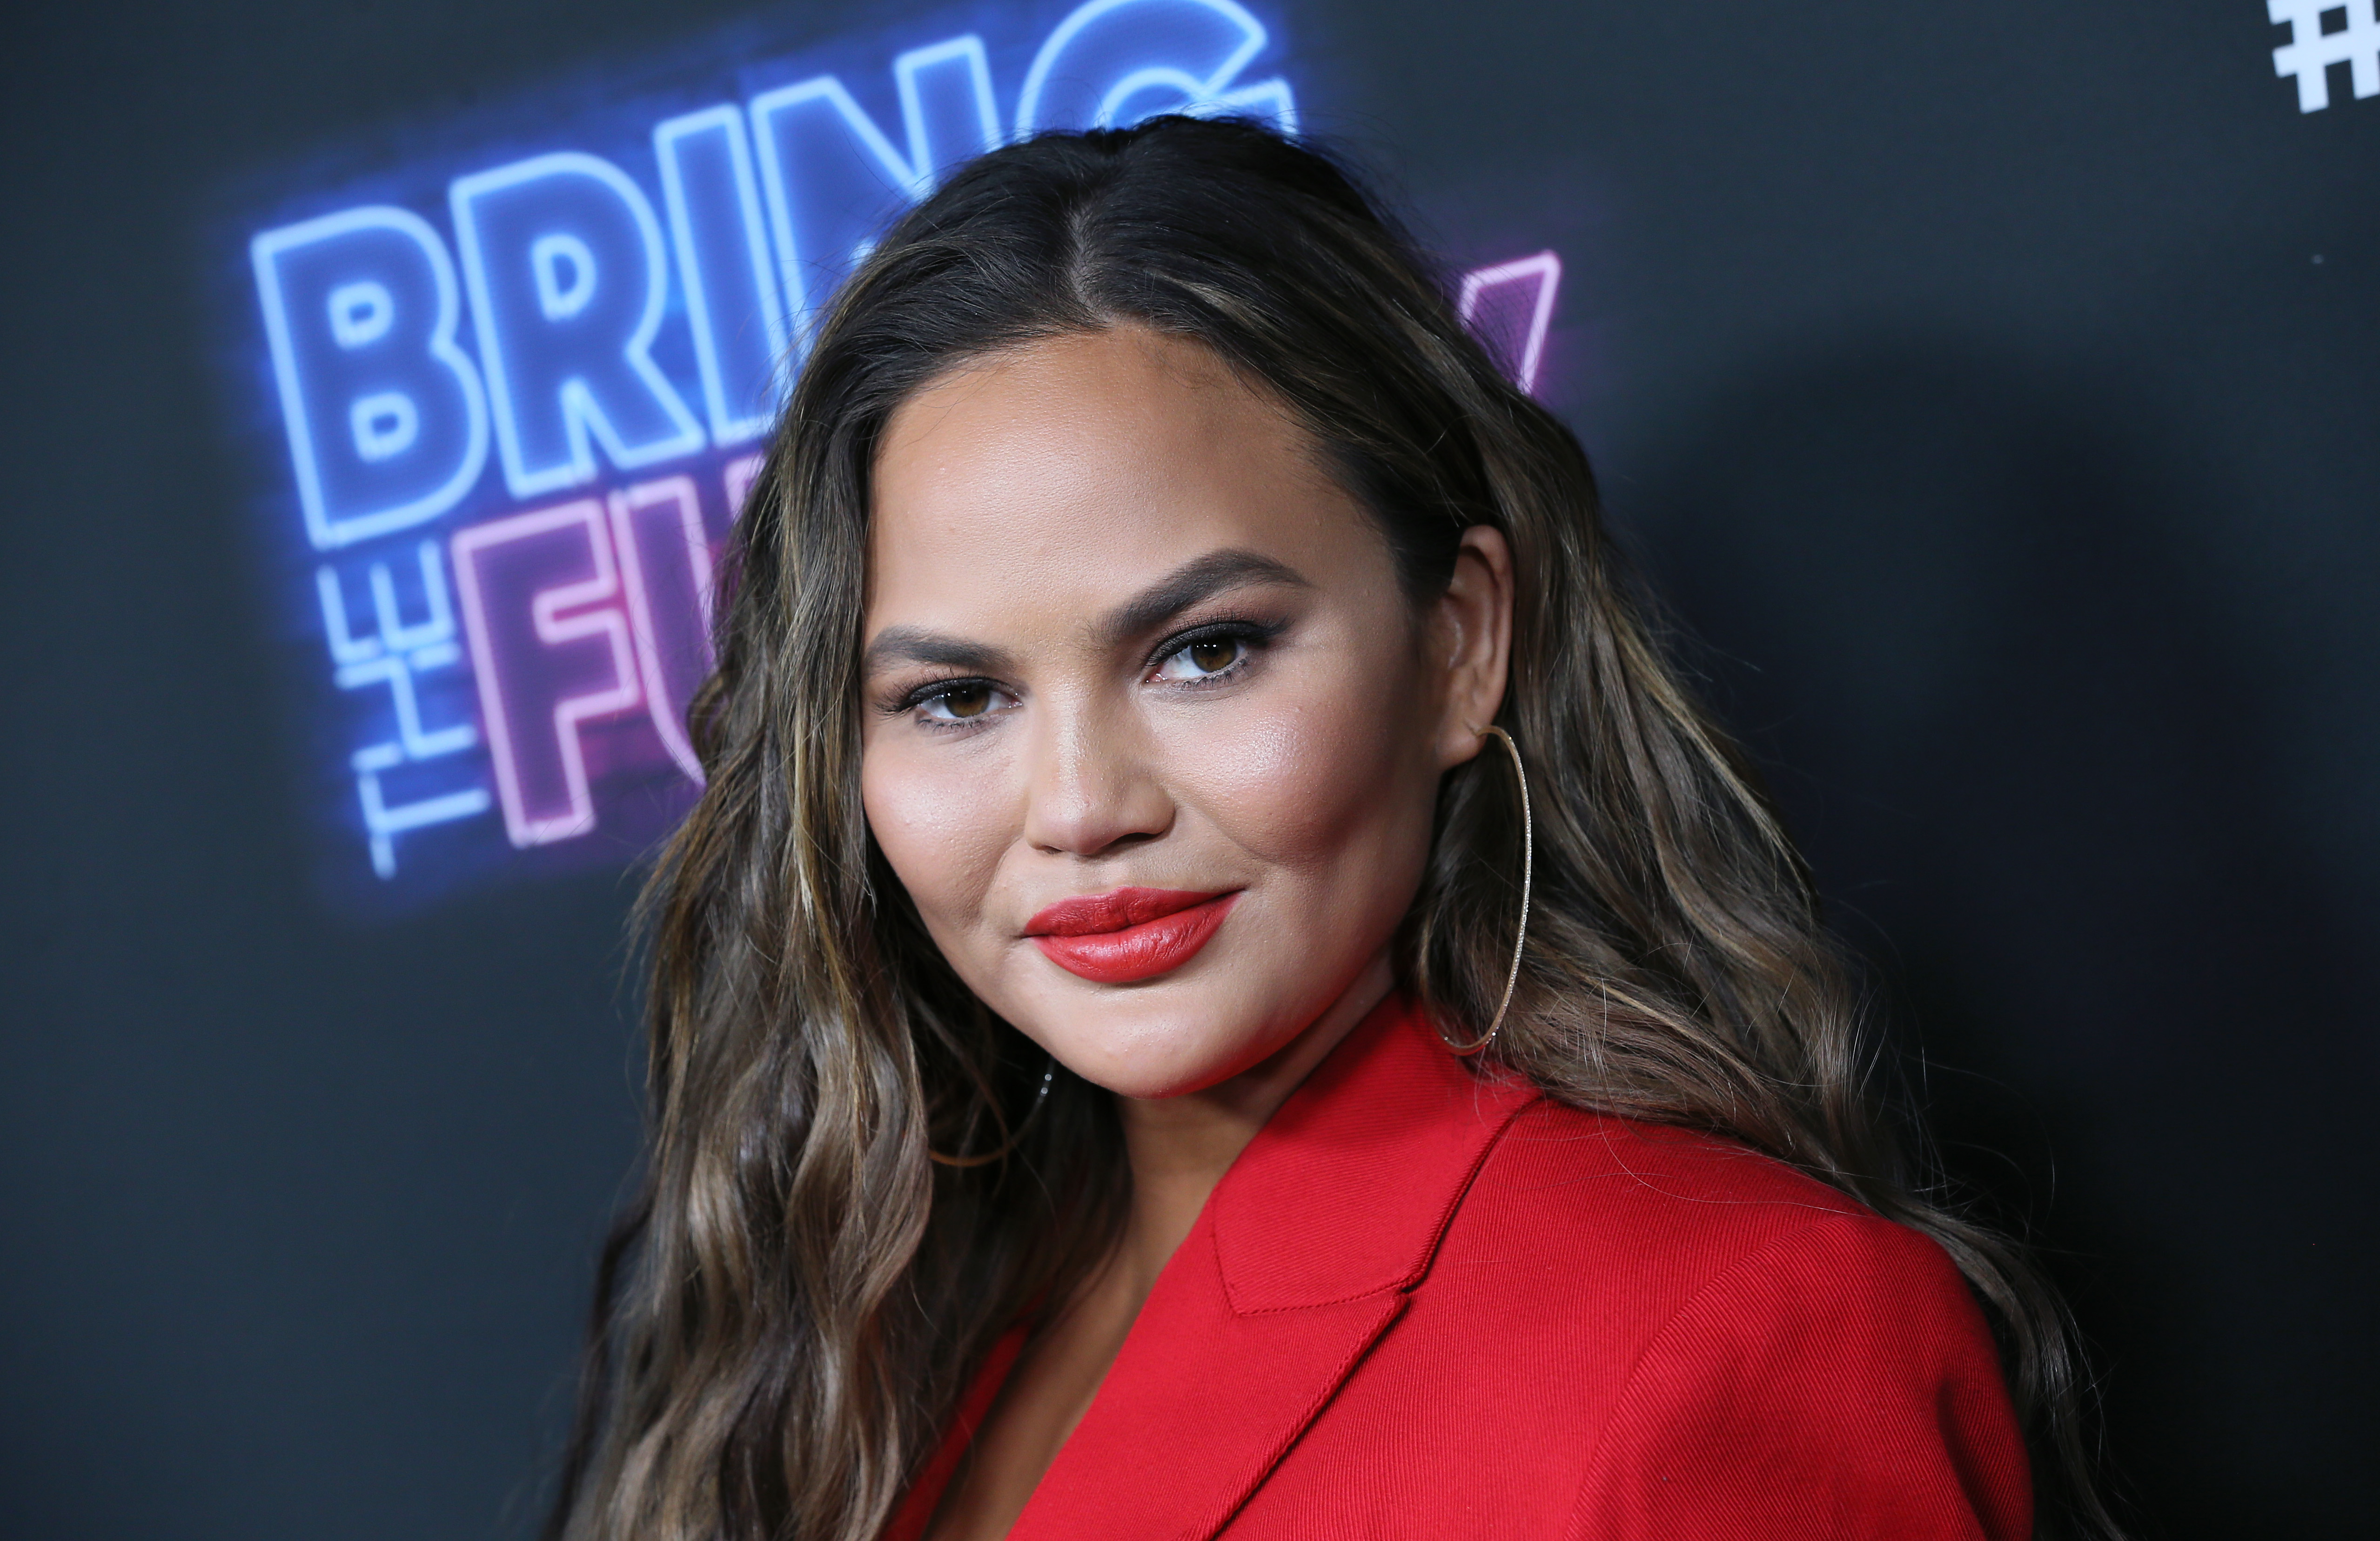 Chrissy Teigen attends the premiere of NBC's 'Bring The Funny' on June 26, 2019 in Los Angeles, California.